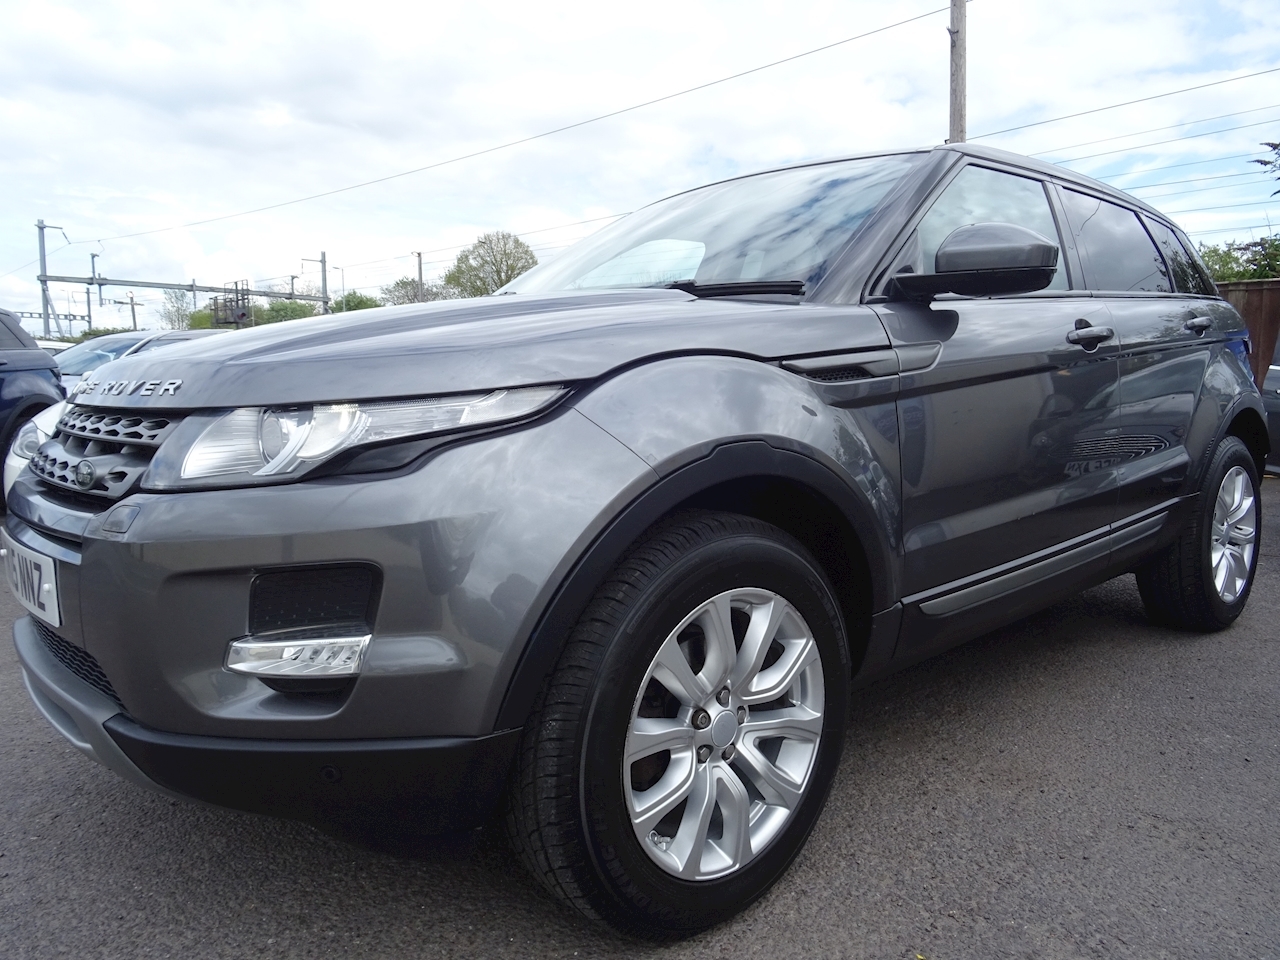 2.2 SD4 Pure Tech SUV 5dr Diesel Automatic AWD (159 g/km, 190 bhp)